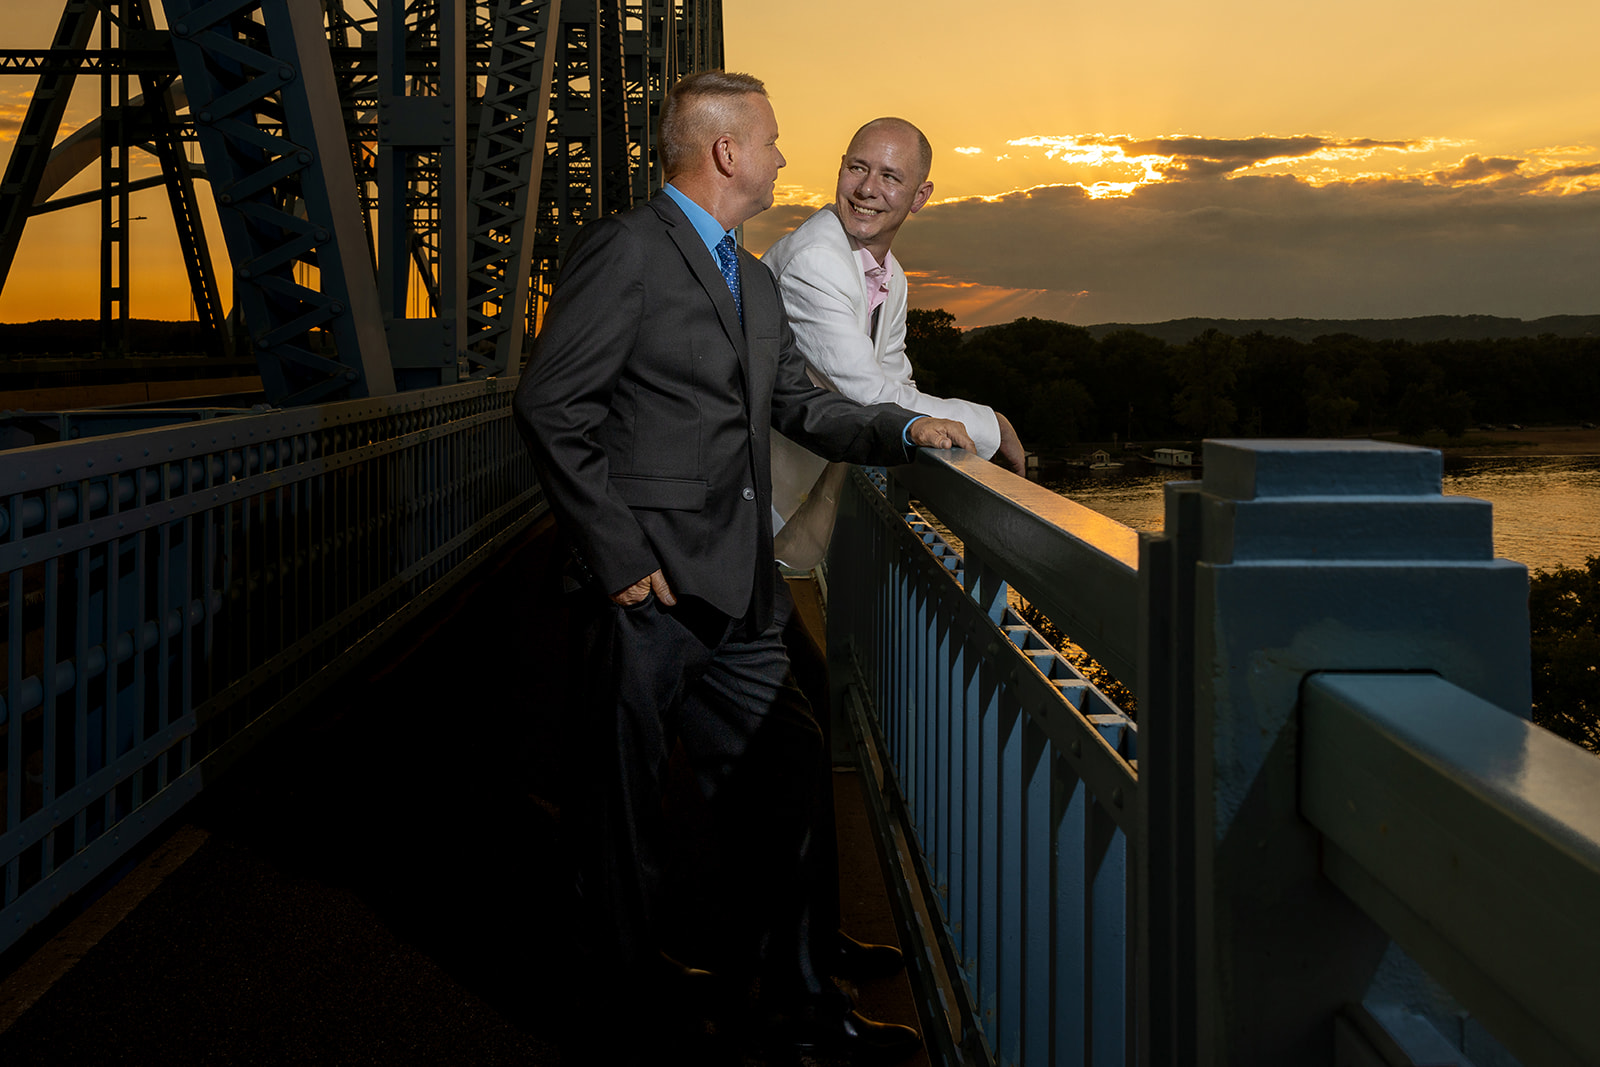 Candid Moments on Cass Street Bridge: J L Wiswell Photography